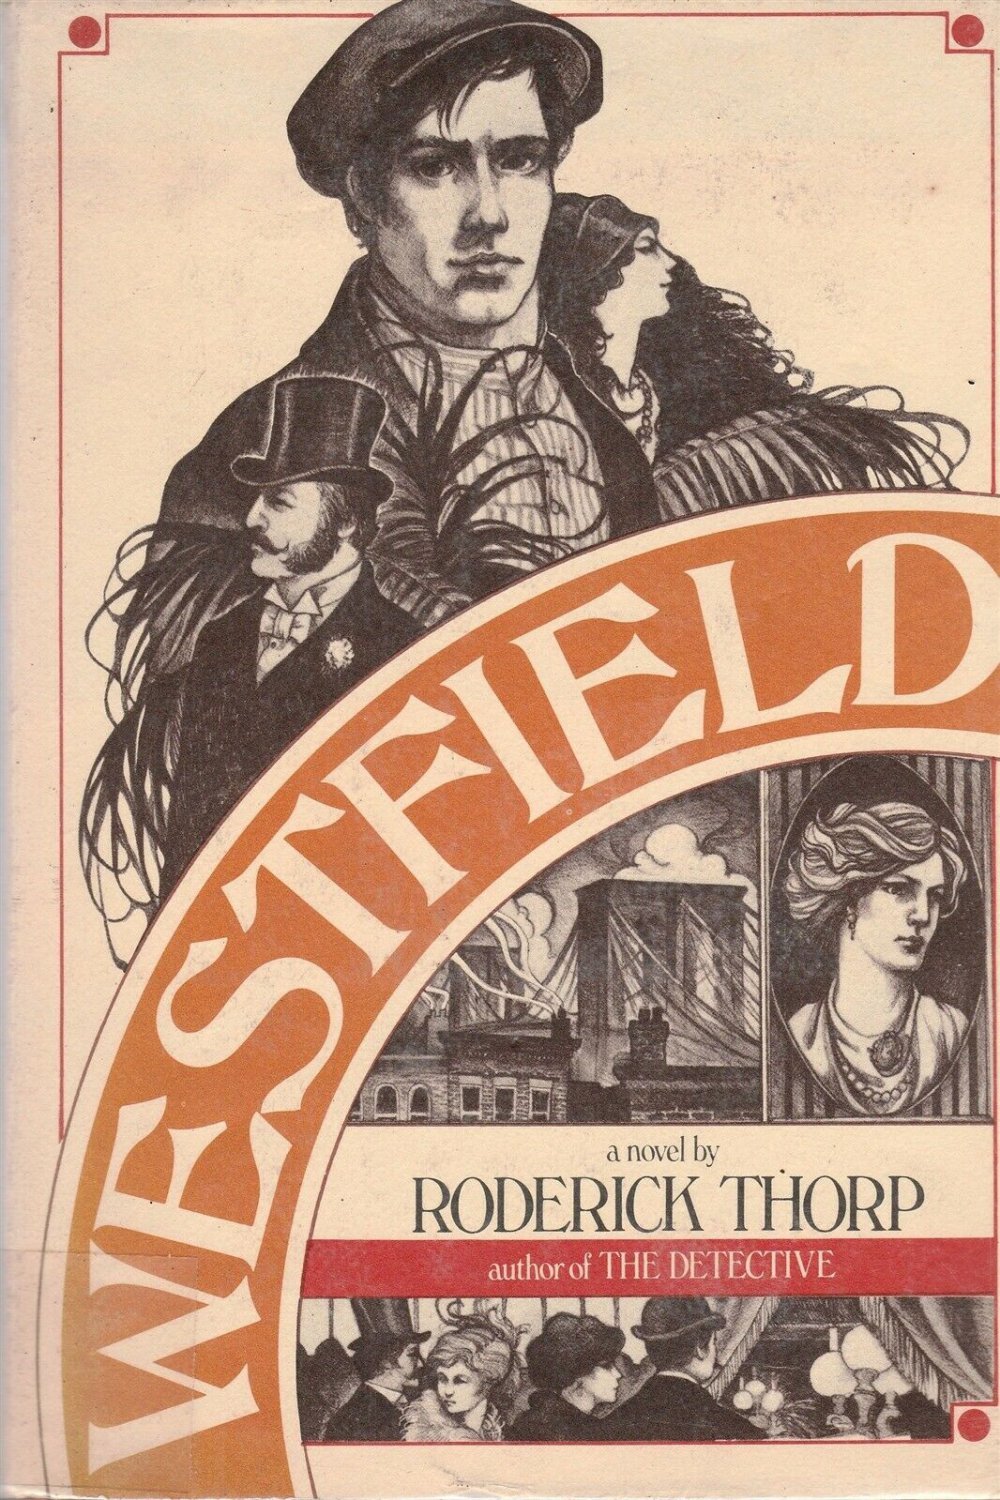 Roderick Thorp - Westfield - 1977 - Hardcover